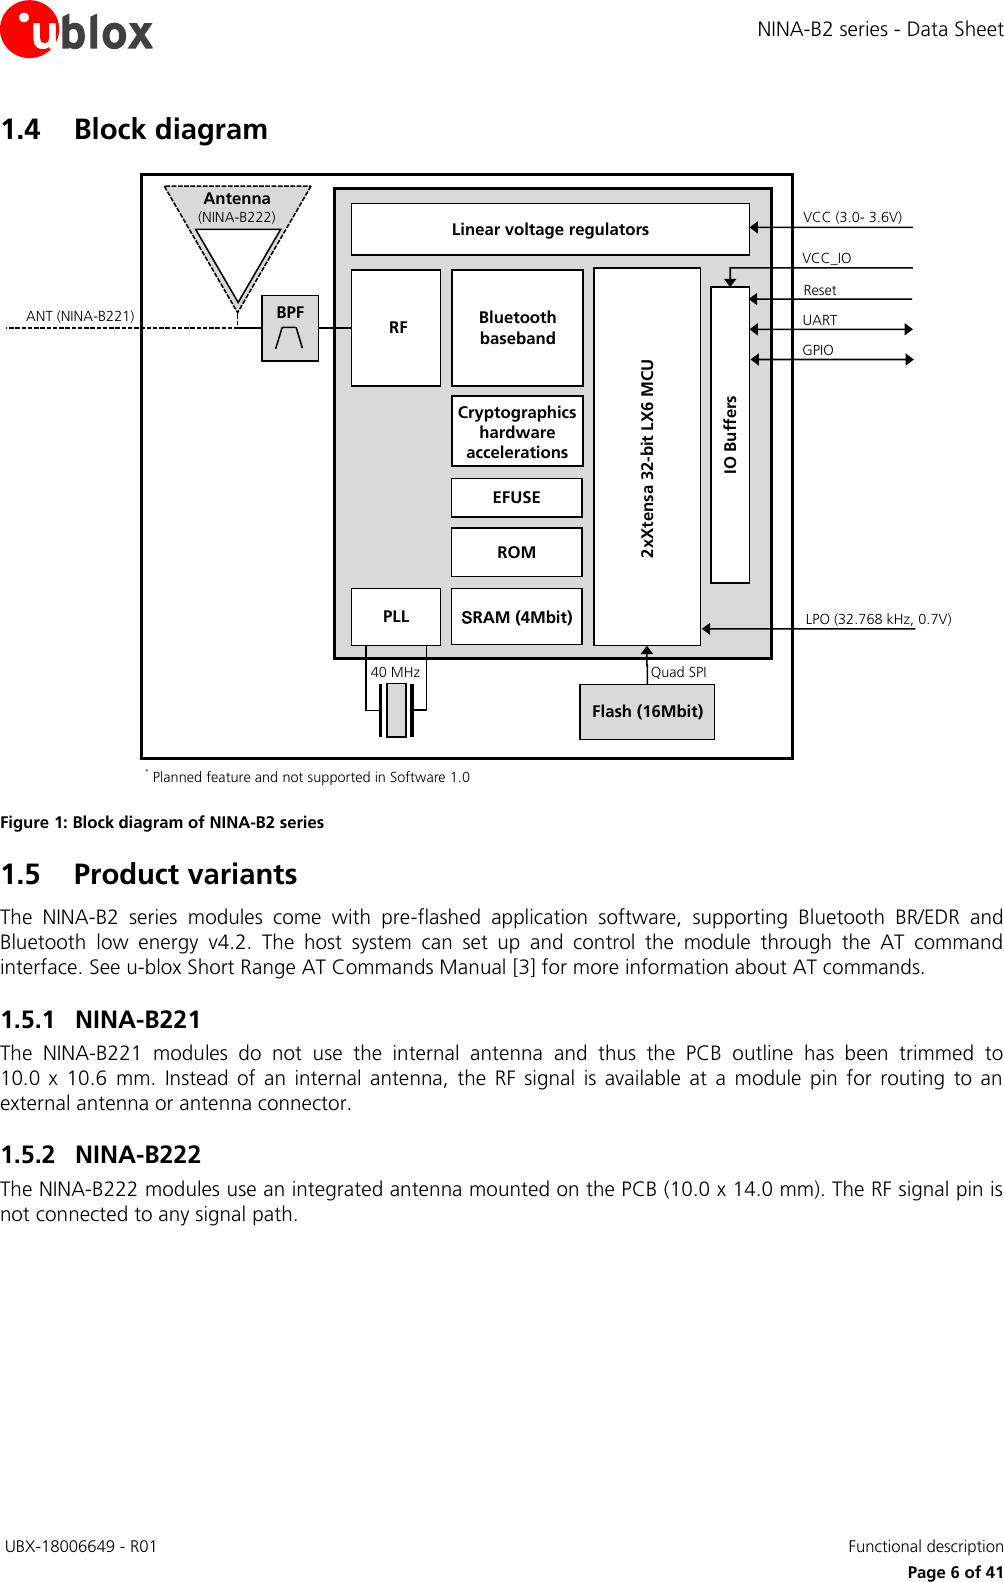 NINA-B2 series - Data Sheet  UBX-18006649 - R01   Functional description     Page 6 of 41 1.4 Block diagram   Figure 1: Block diagram of NINA-B2 series 1.5 Product variants The  NINA-B2  series  modules  come  with  pre-flashed  application  software,  supporting  Bluetooth  BR/EDR  and Bluetooth  low  energy  v4.2.  The  host  system  can  set  up  and  control  the  module  through  the  AT  command interface. See u-blox Short Range AT Commands Manual [3] for more information about AT commands. 1.5.1 NINA-B221 The  NINA-B221  modules  do  not  use  the  internal  antenna  and  thus  the  PCB  outline  has  been  trimmed  to  10.0  x  10.6  mm.  Instead  of  an  internal  antenna,  the  RF  signal  is  available  at  a  module  pin  for  routing  to  an external antenna or antenna connector. 1.5.2 NINA-B222 The NINA-B222 modules use an integrated antenna mounted on the PCB (10.0 x 14.0 mm). The RF signal pin is not connected to any signal path.   Flash (16Mbit) Linear voltage regulators  RF ROM IO Buffers 2xXtensa 32-bit LX6 MCU  SRAM (4Mbit) Cryptographics hardware accelerations  Antenna (NINA-B222) PLL Quad SPI VCC_IO VCC (3.0- 3.6V) 40 MHz Reset UART LPO (32.768 kHz, 0.7V)   EFUSE * Planned feature and not supported in Software 1.0 GPIO BPF ANT (NINA-B221) Bluetooth baseband 